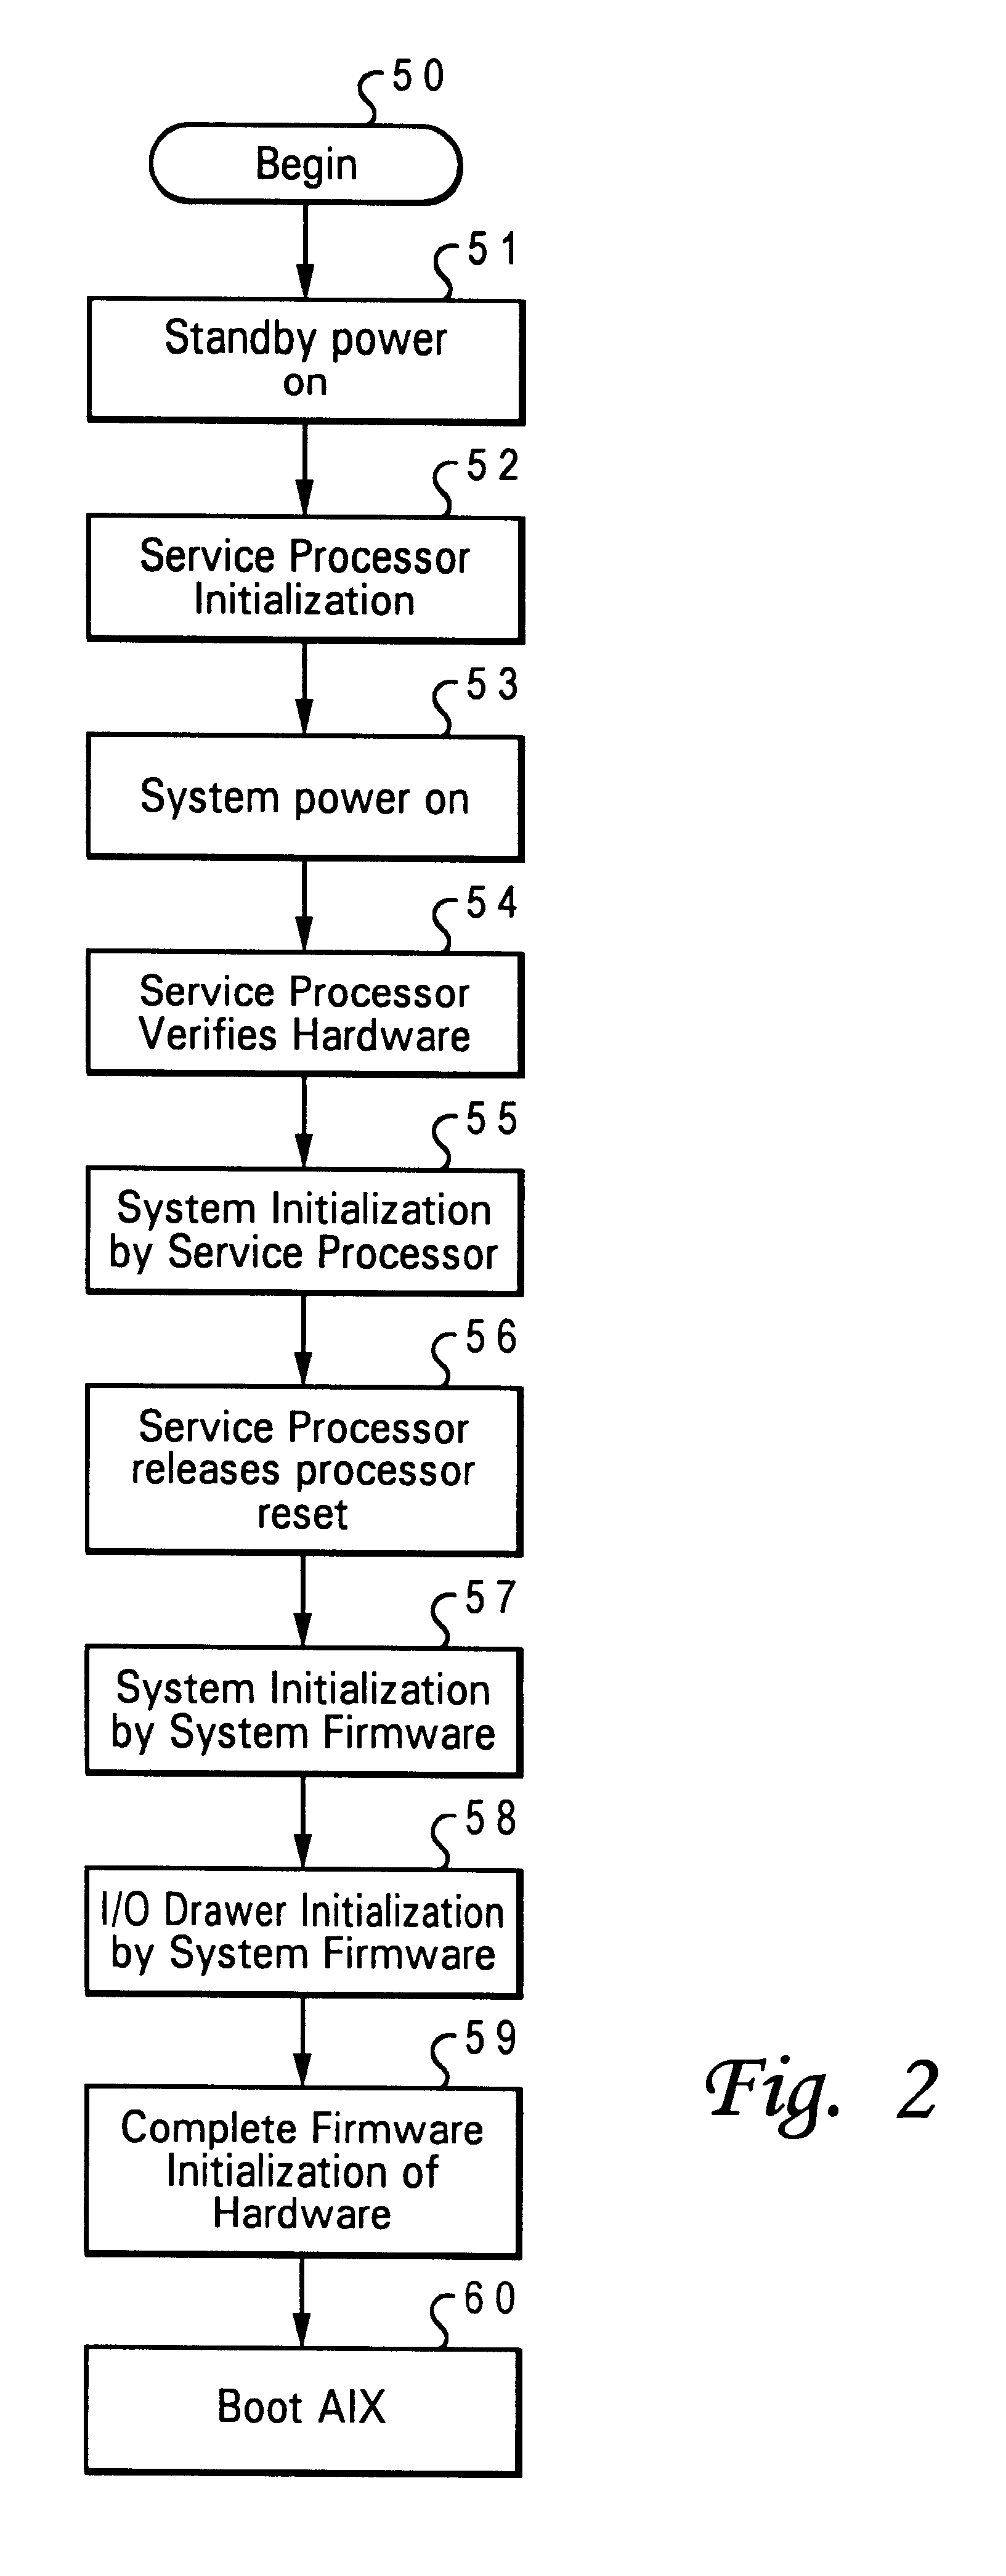 Method and apparatus for locating and displaying a defective component in a data processing system during a system startup using location and progress codes associated with the component